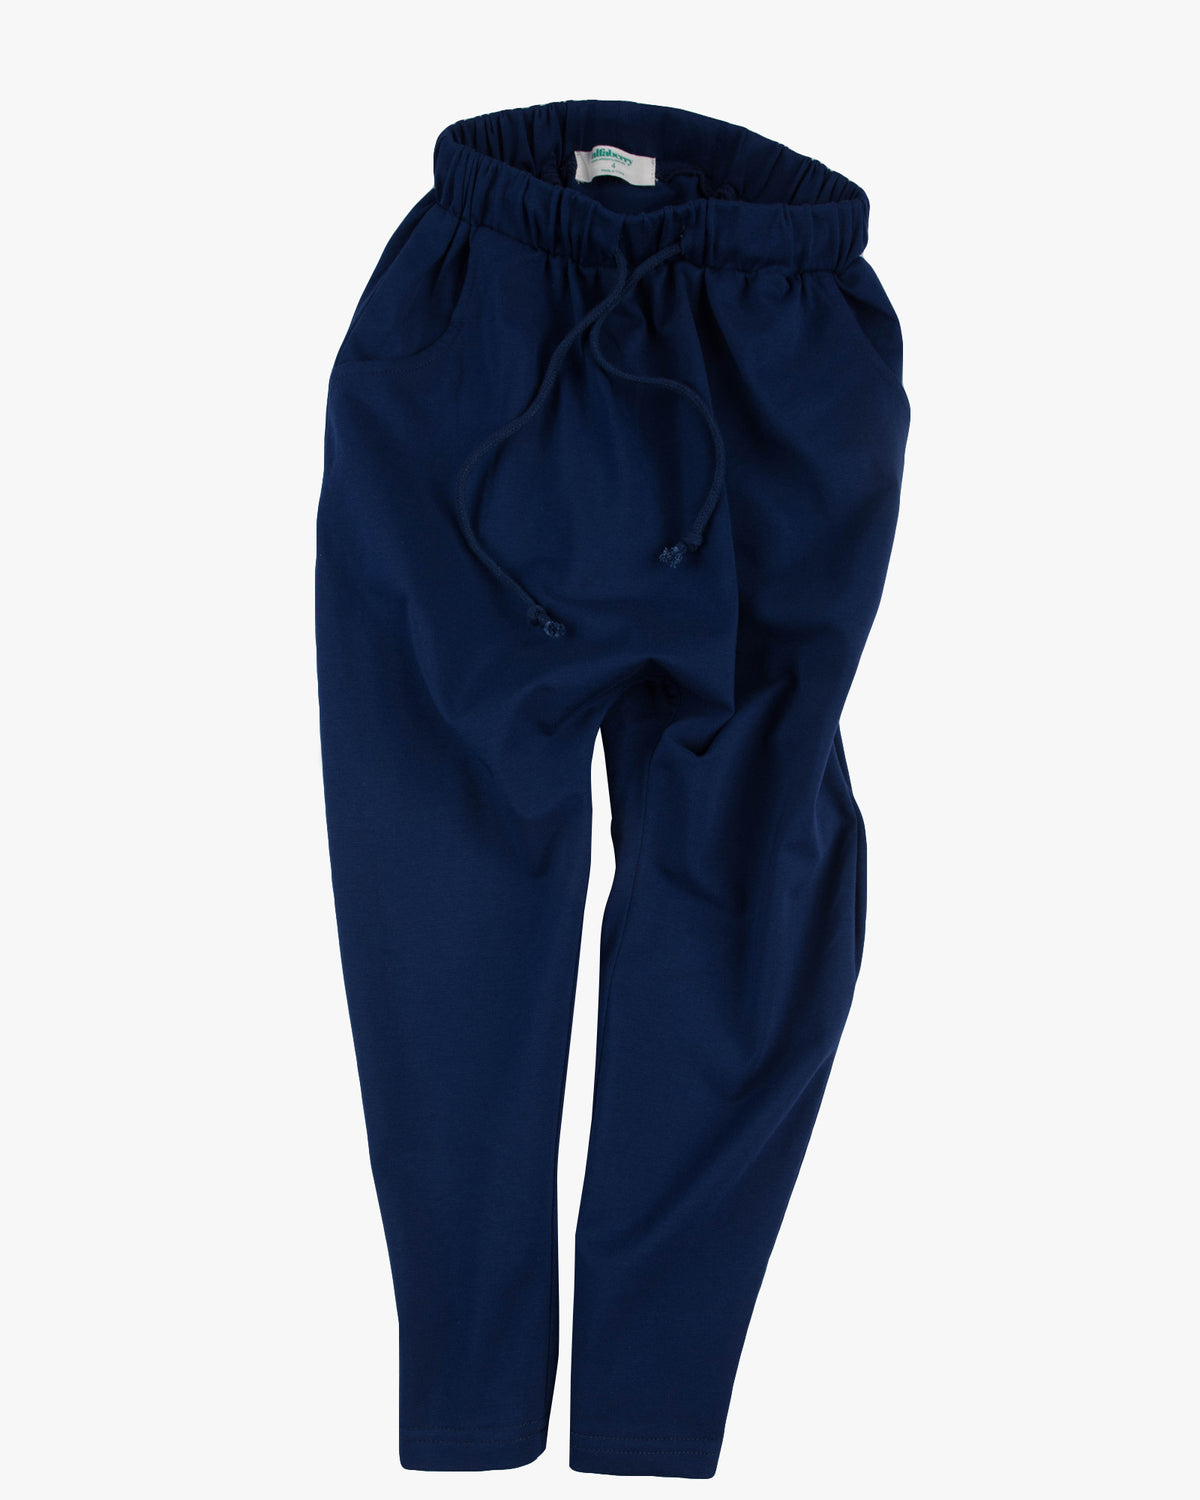 Slouch Jersey Pant navy front